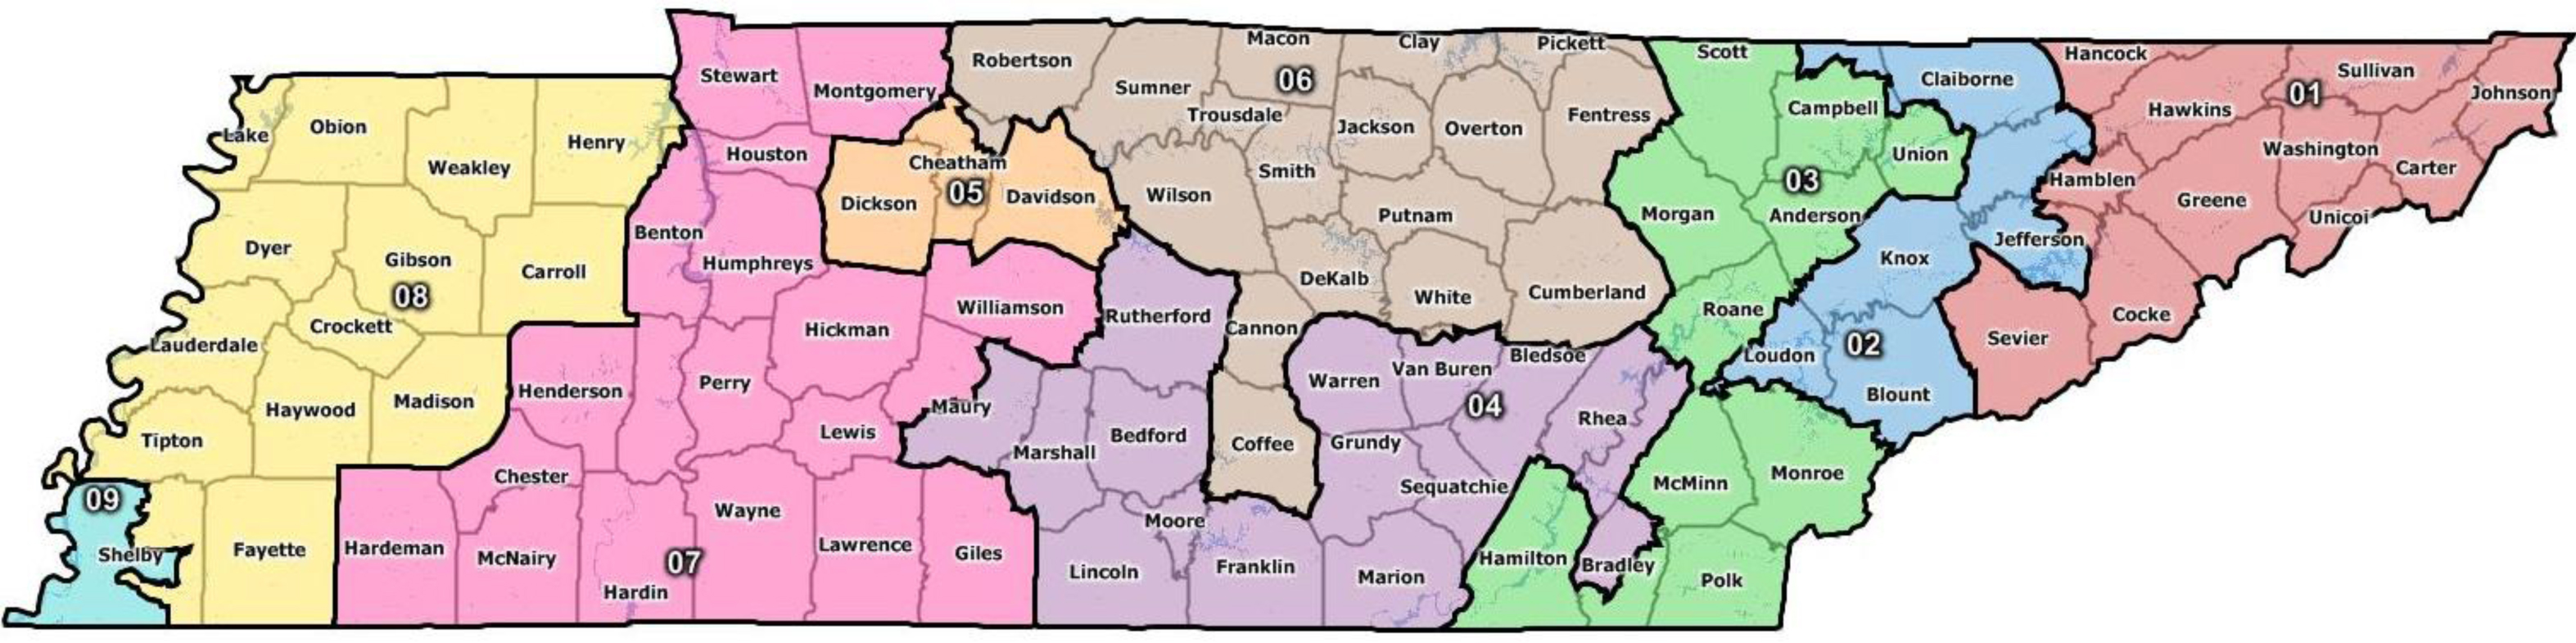 Proposed congressional maps change Tennessee's 3rd, 4th districts